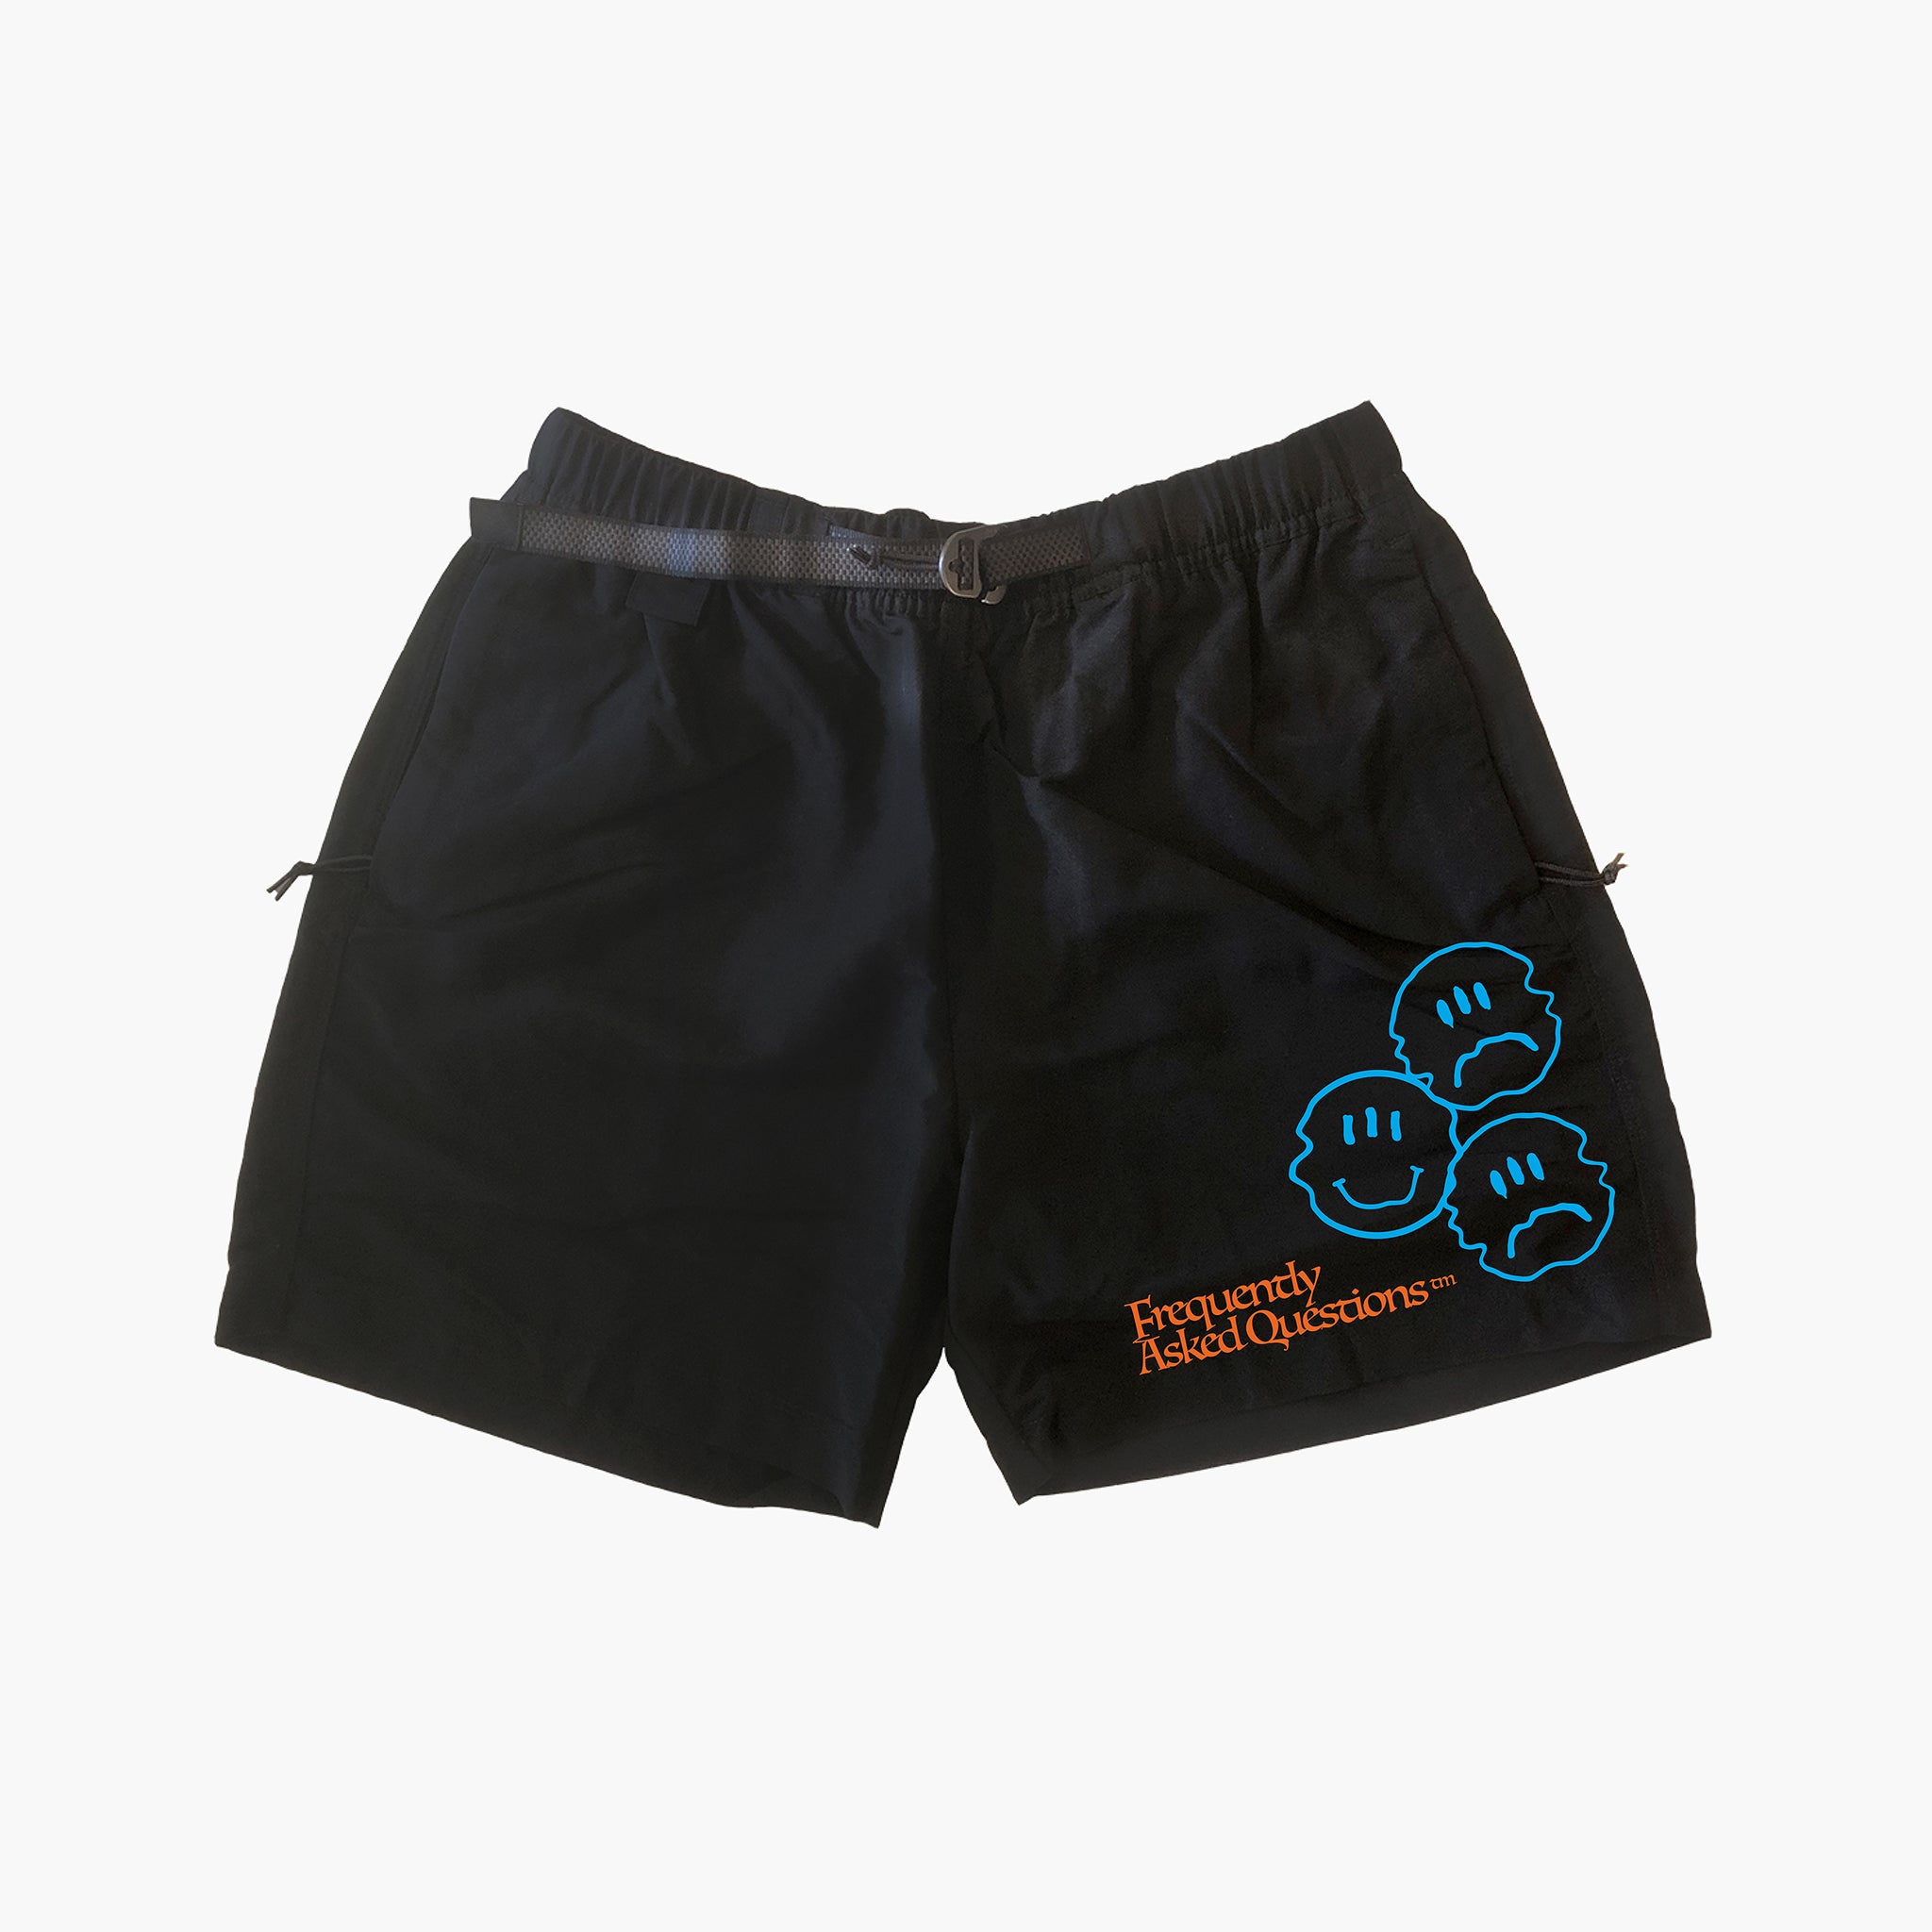 Disconnect Nylon Shorts - Frequently Asked Questions